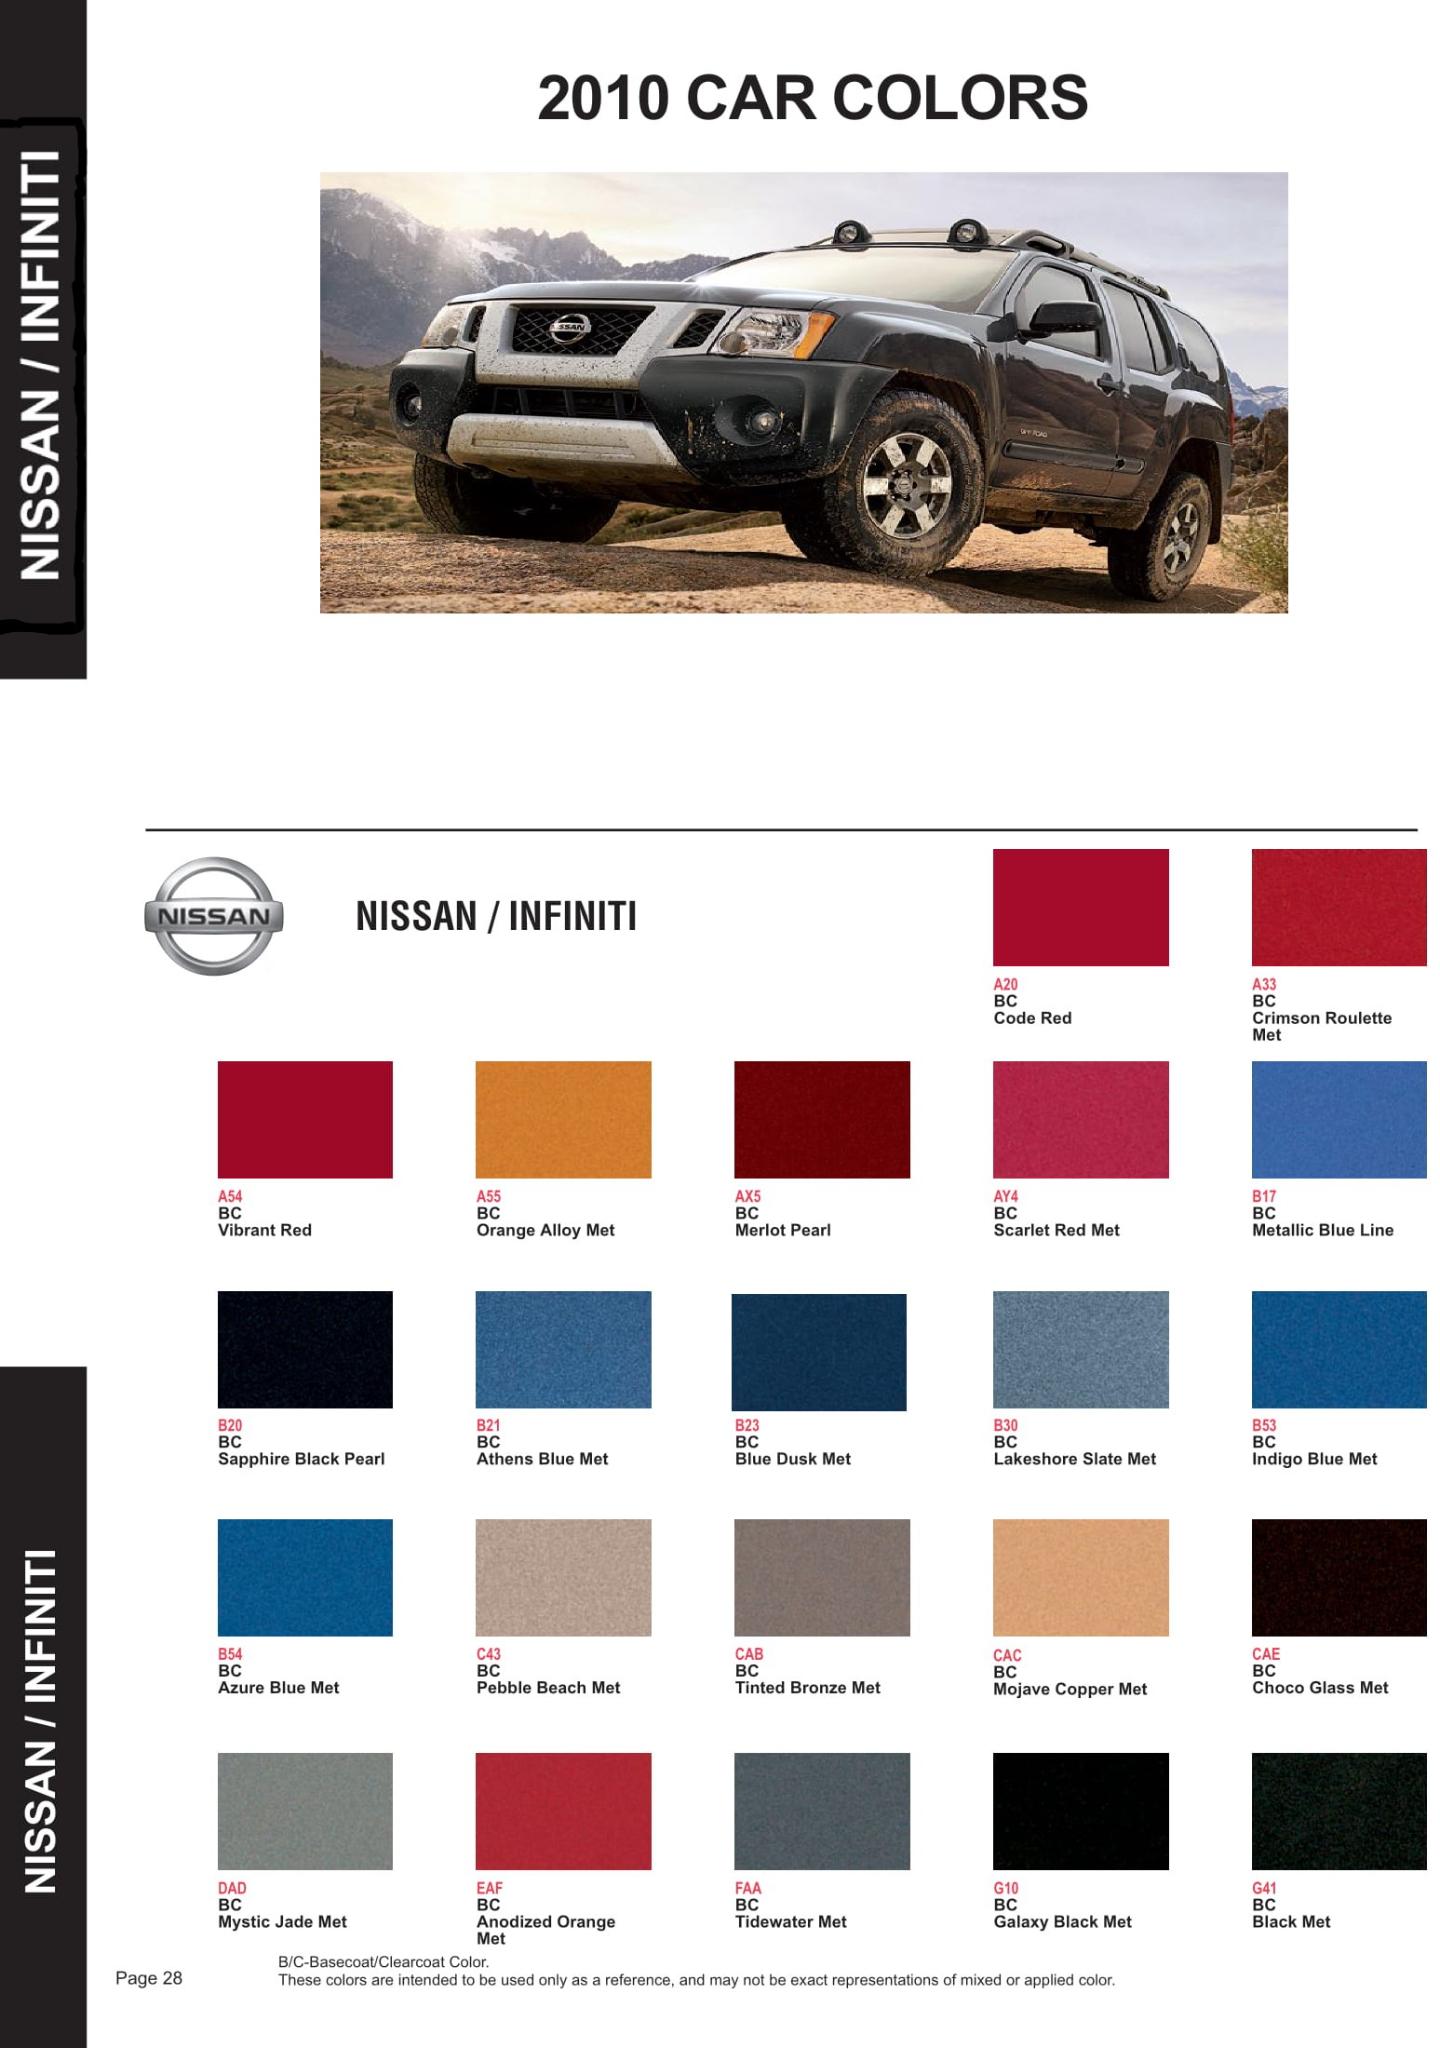 Colors and their codes used on 2010 Nissan and Infinity vehicles